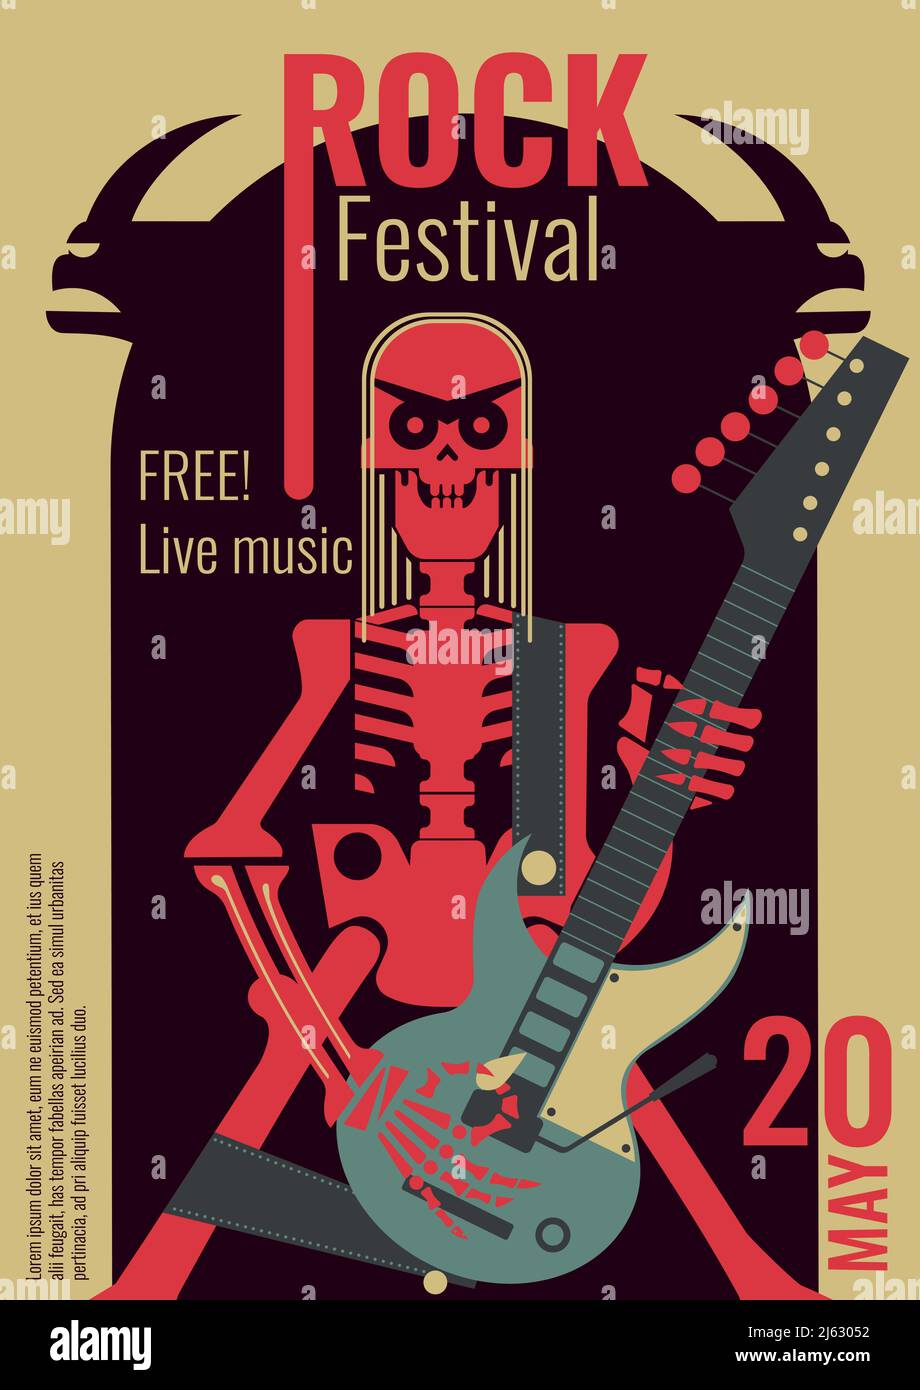 Free rock music band Stock Vector Images - Alamy